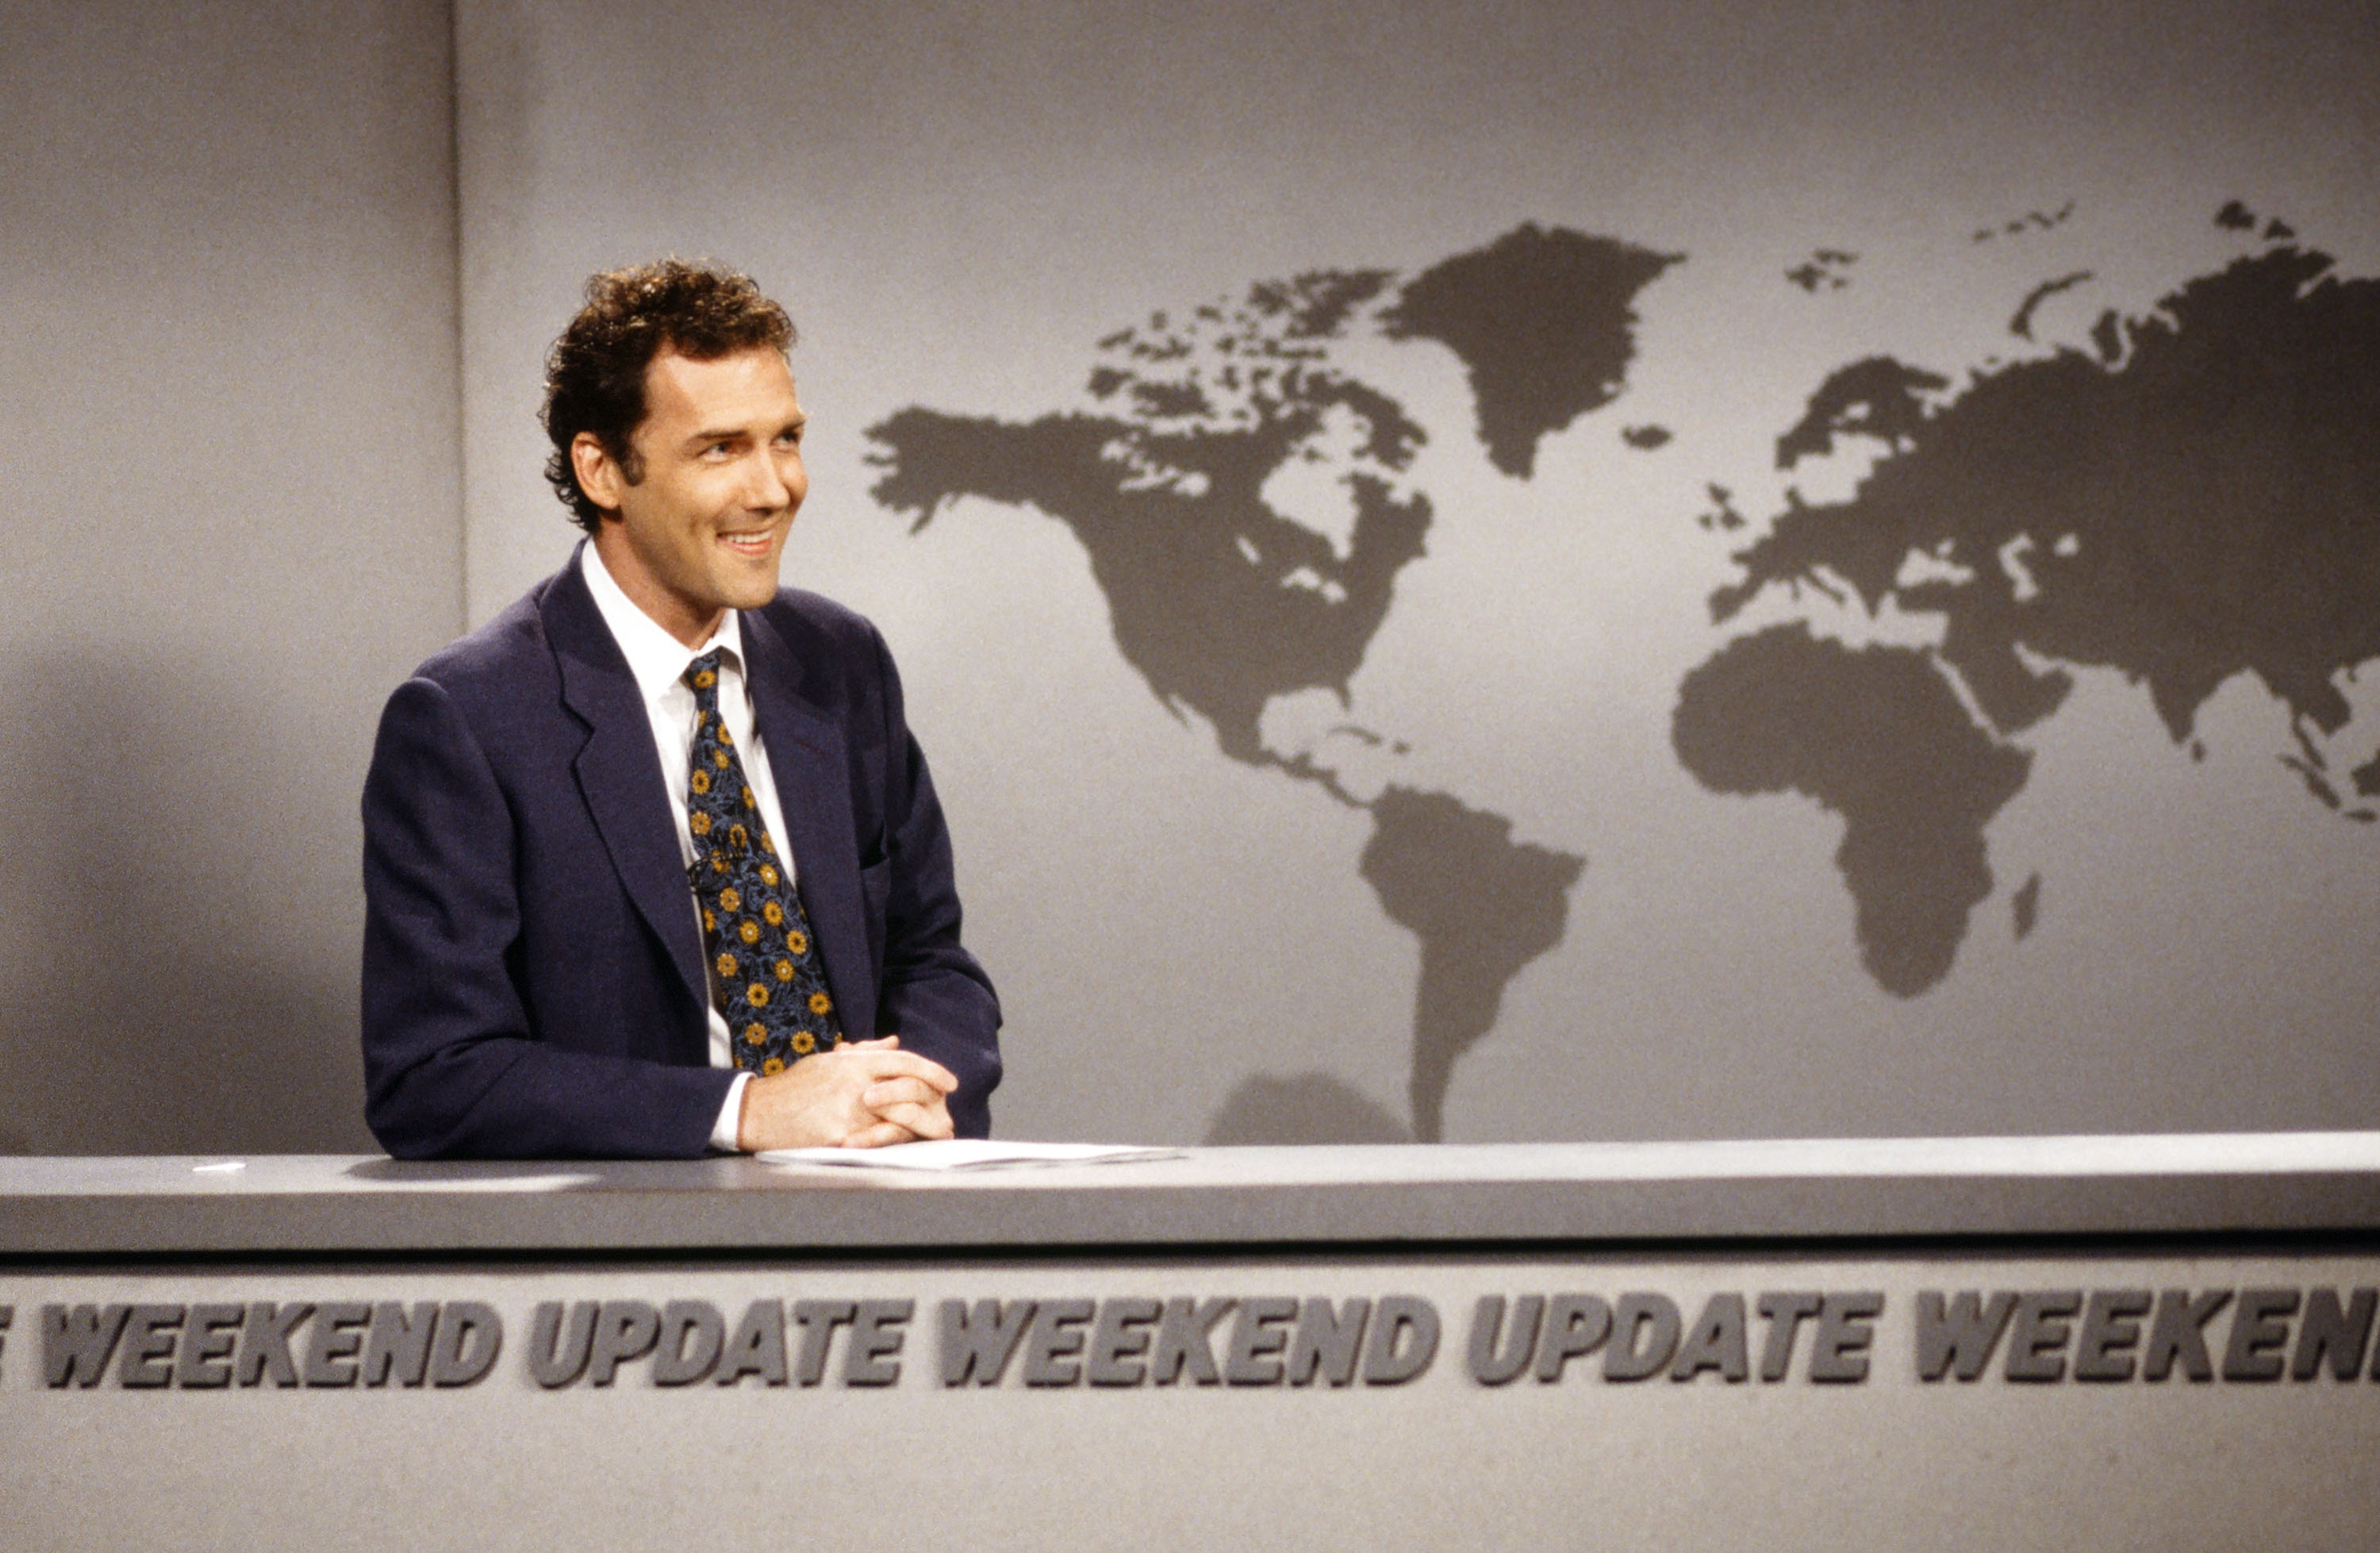 Everyone who's anchored Weekend Update on Saturday Night Live Gallery